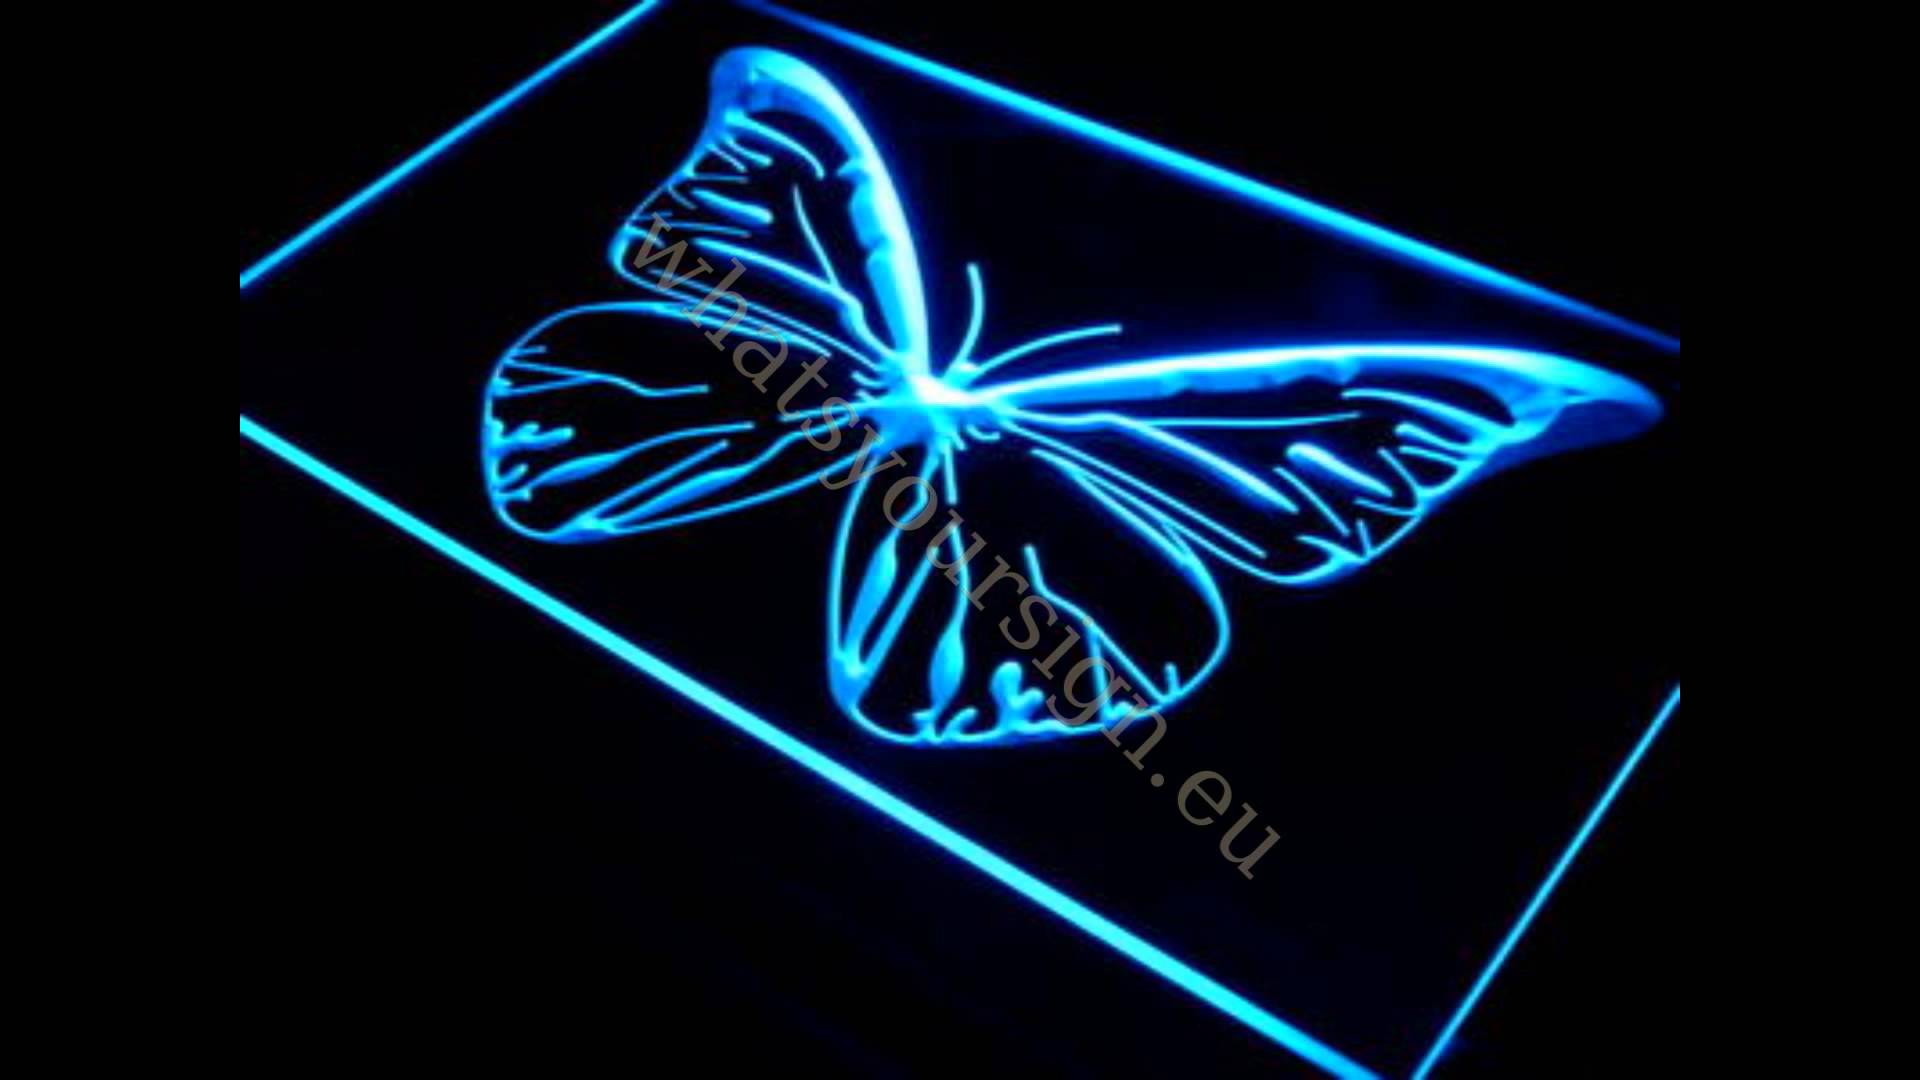 Butterfly - LED neon light sign display - YouTube